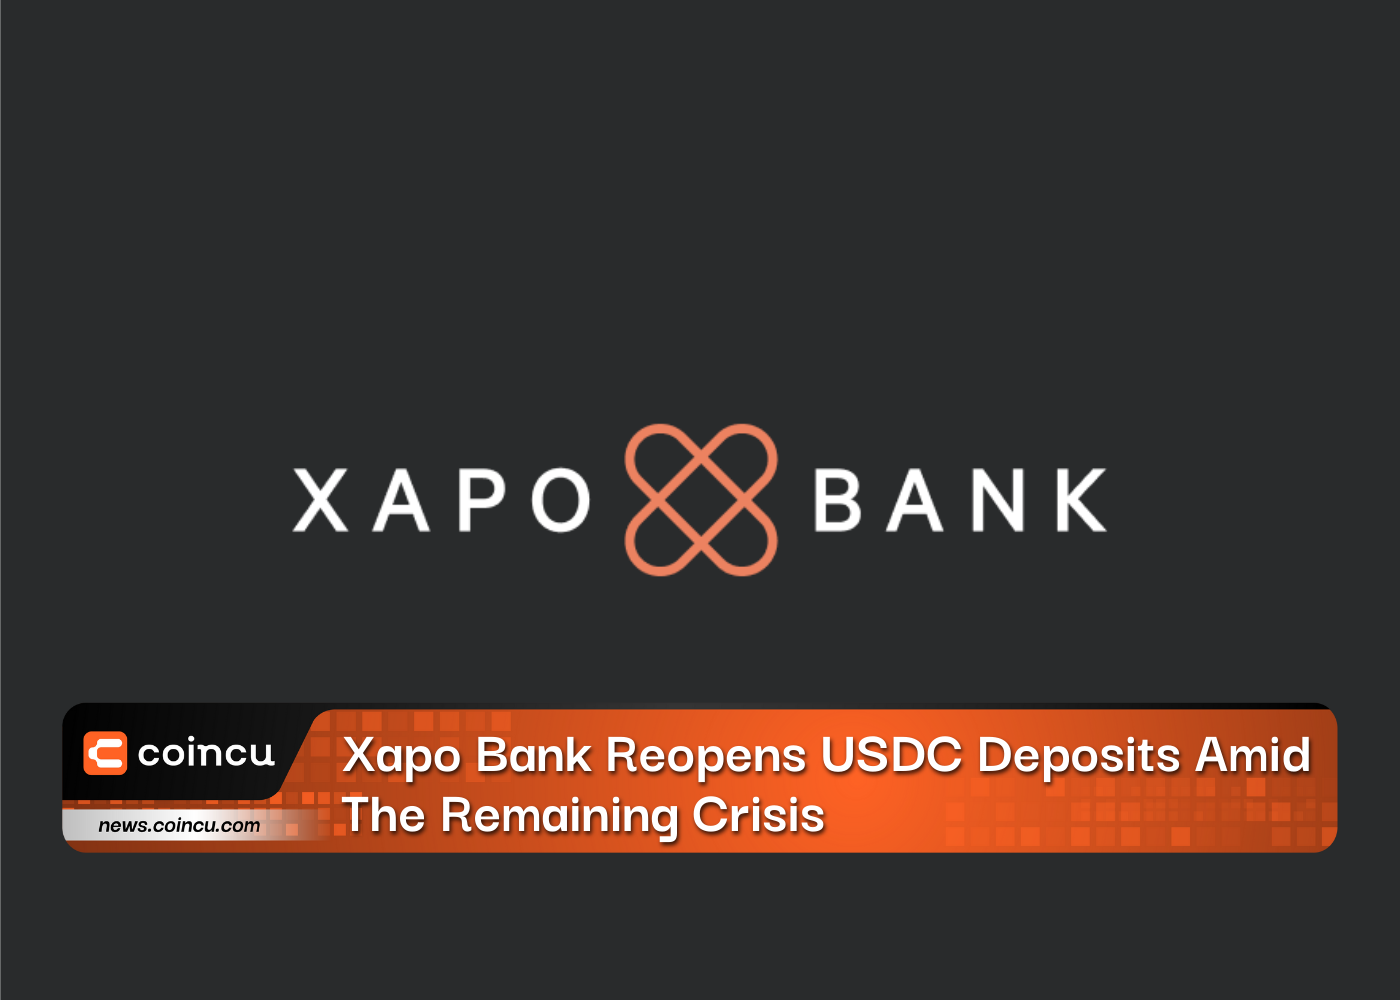 Xapo Bank Reopens USDC Deposits Amid The Remaining Crisis